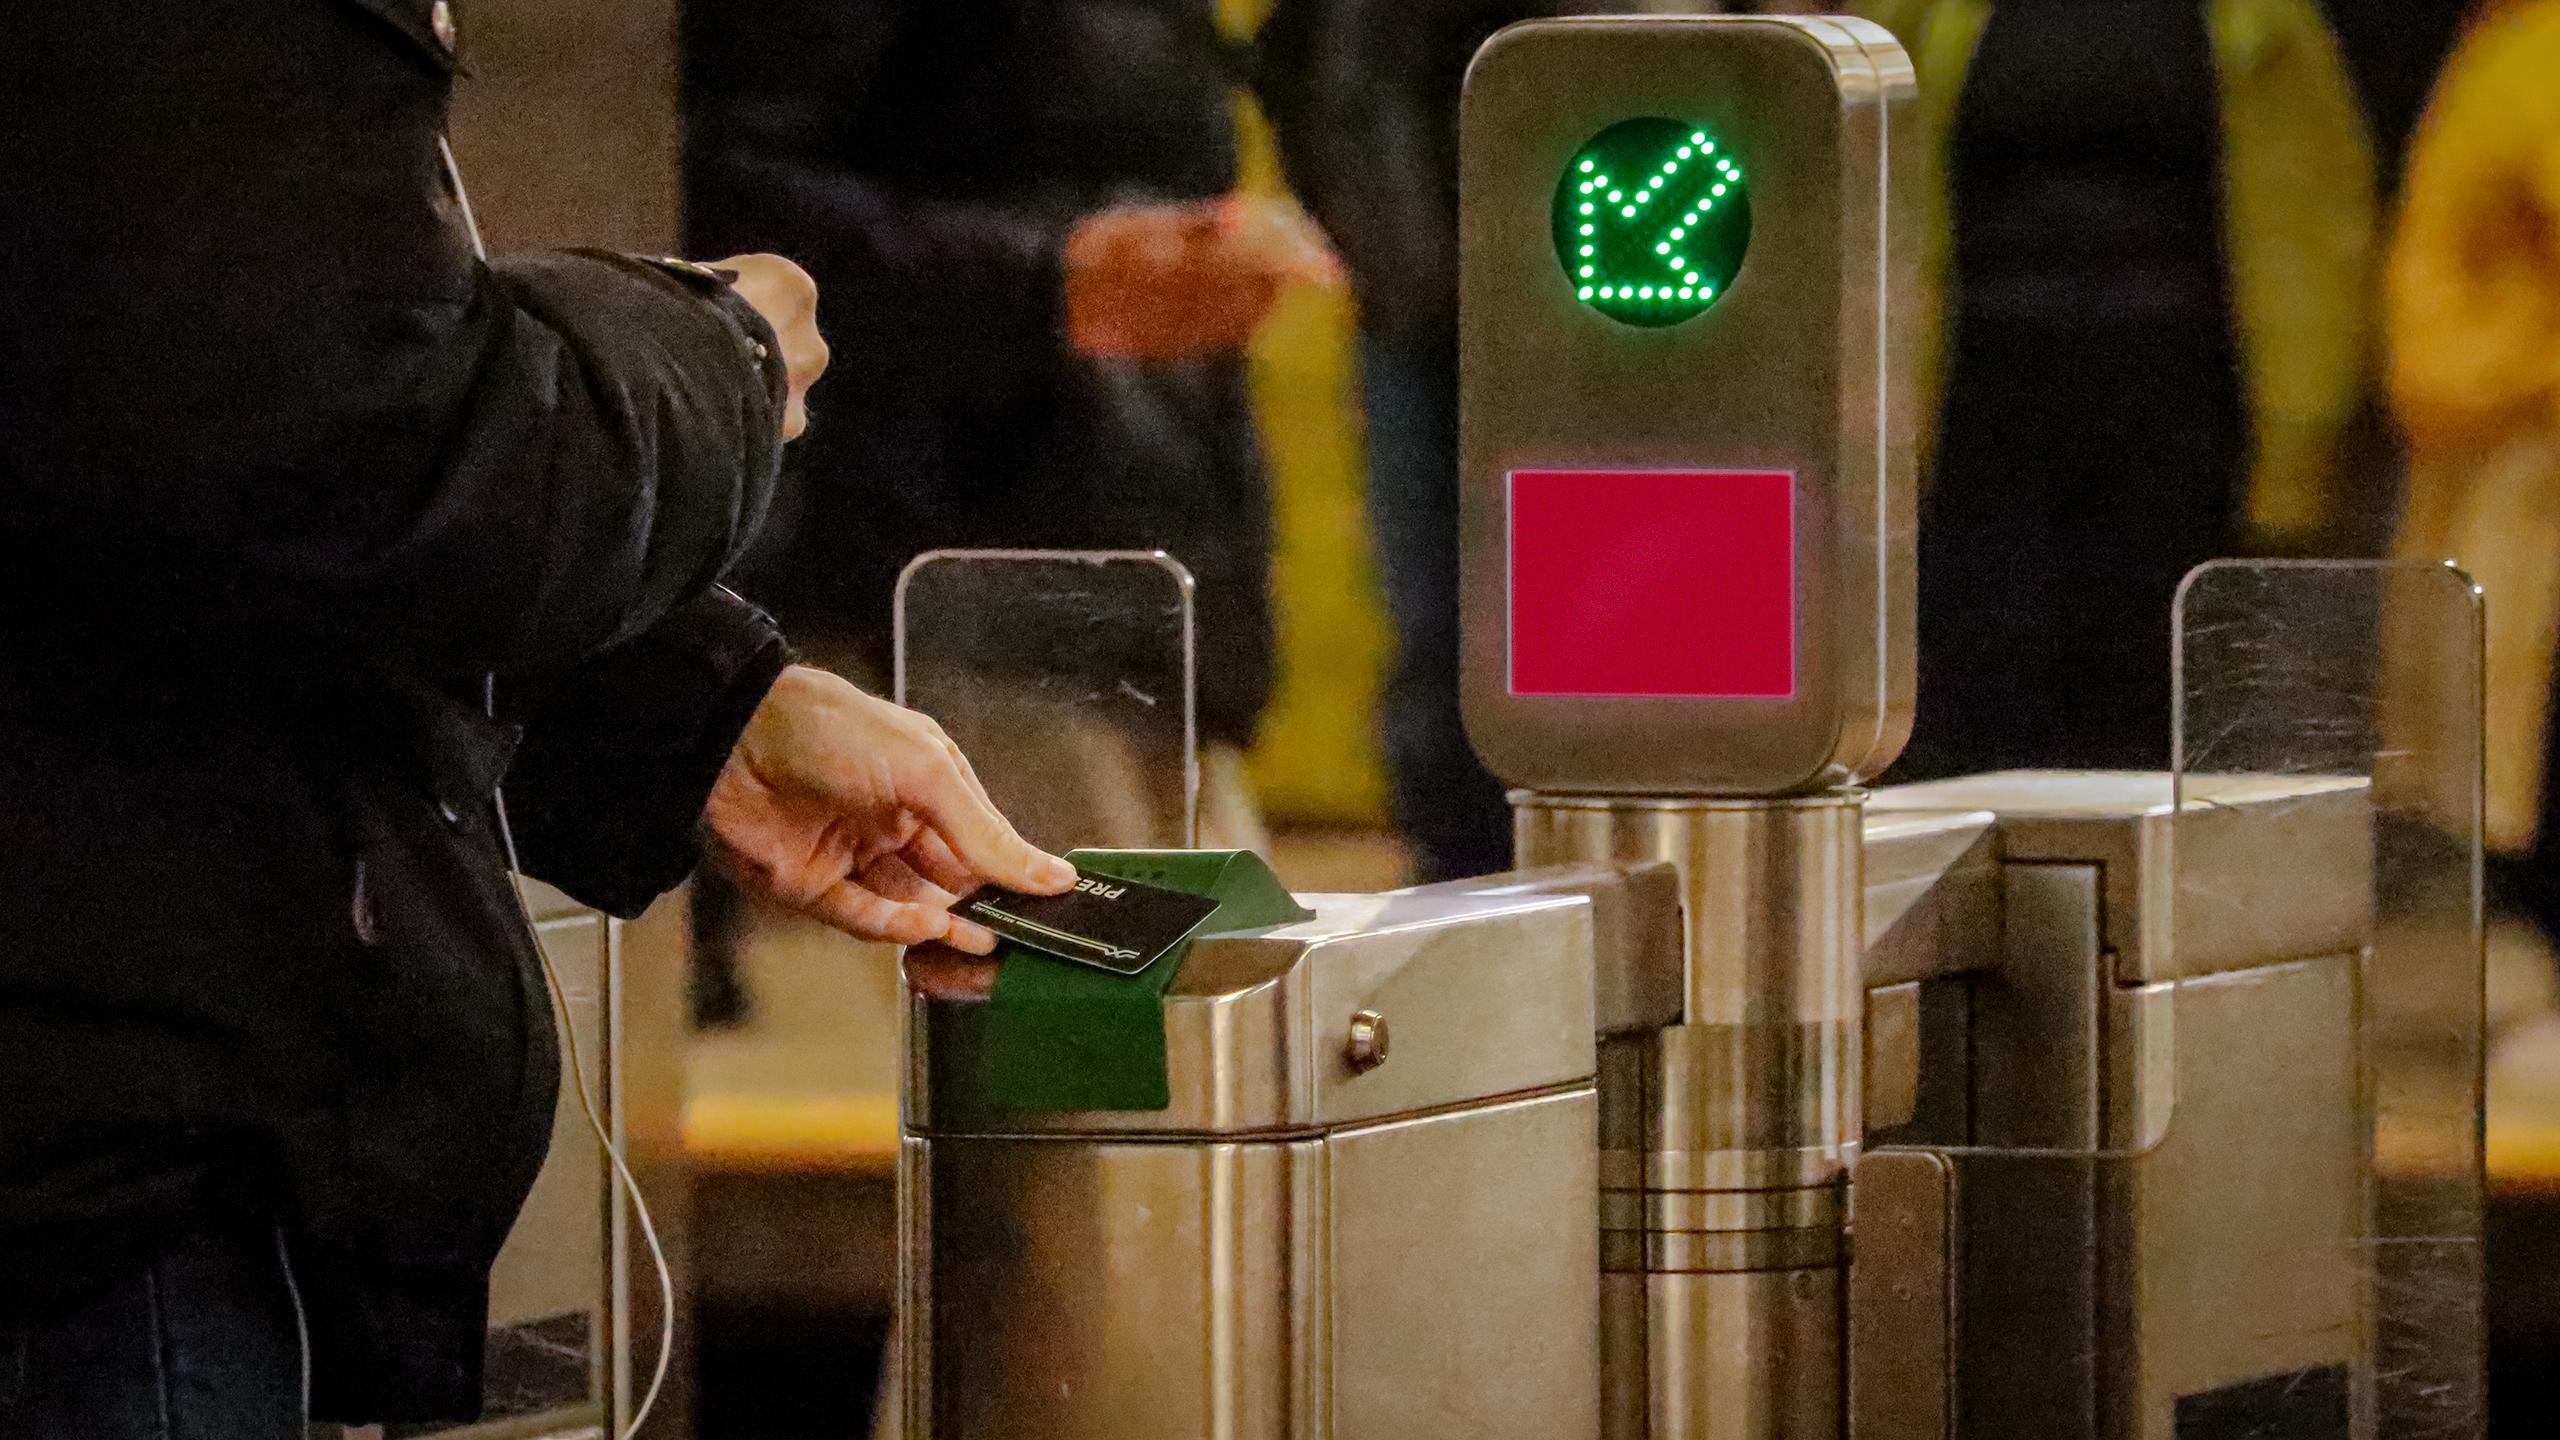 A person taps their presto card on the electronic reader but the screen is red, not allowing them to board the subway.